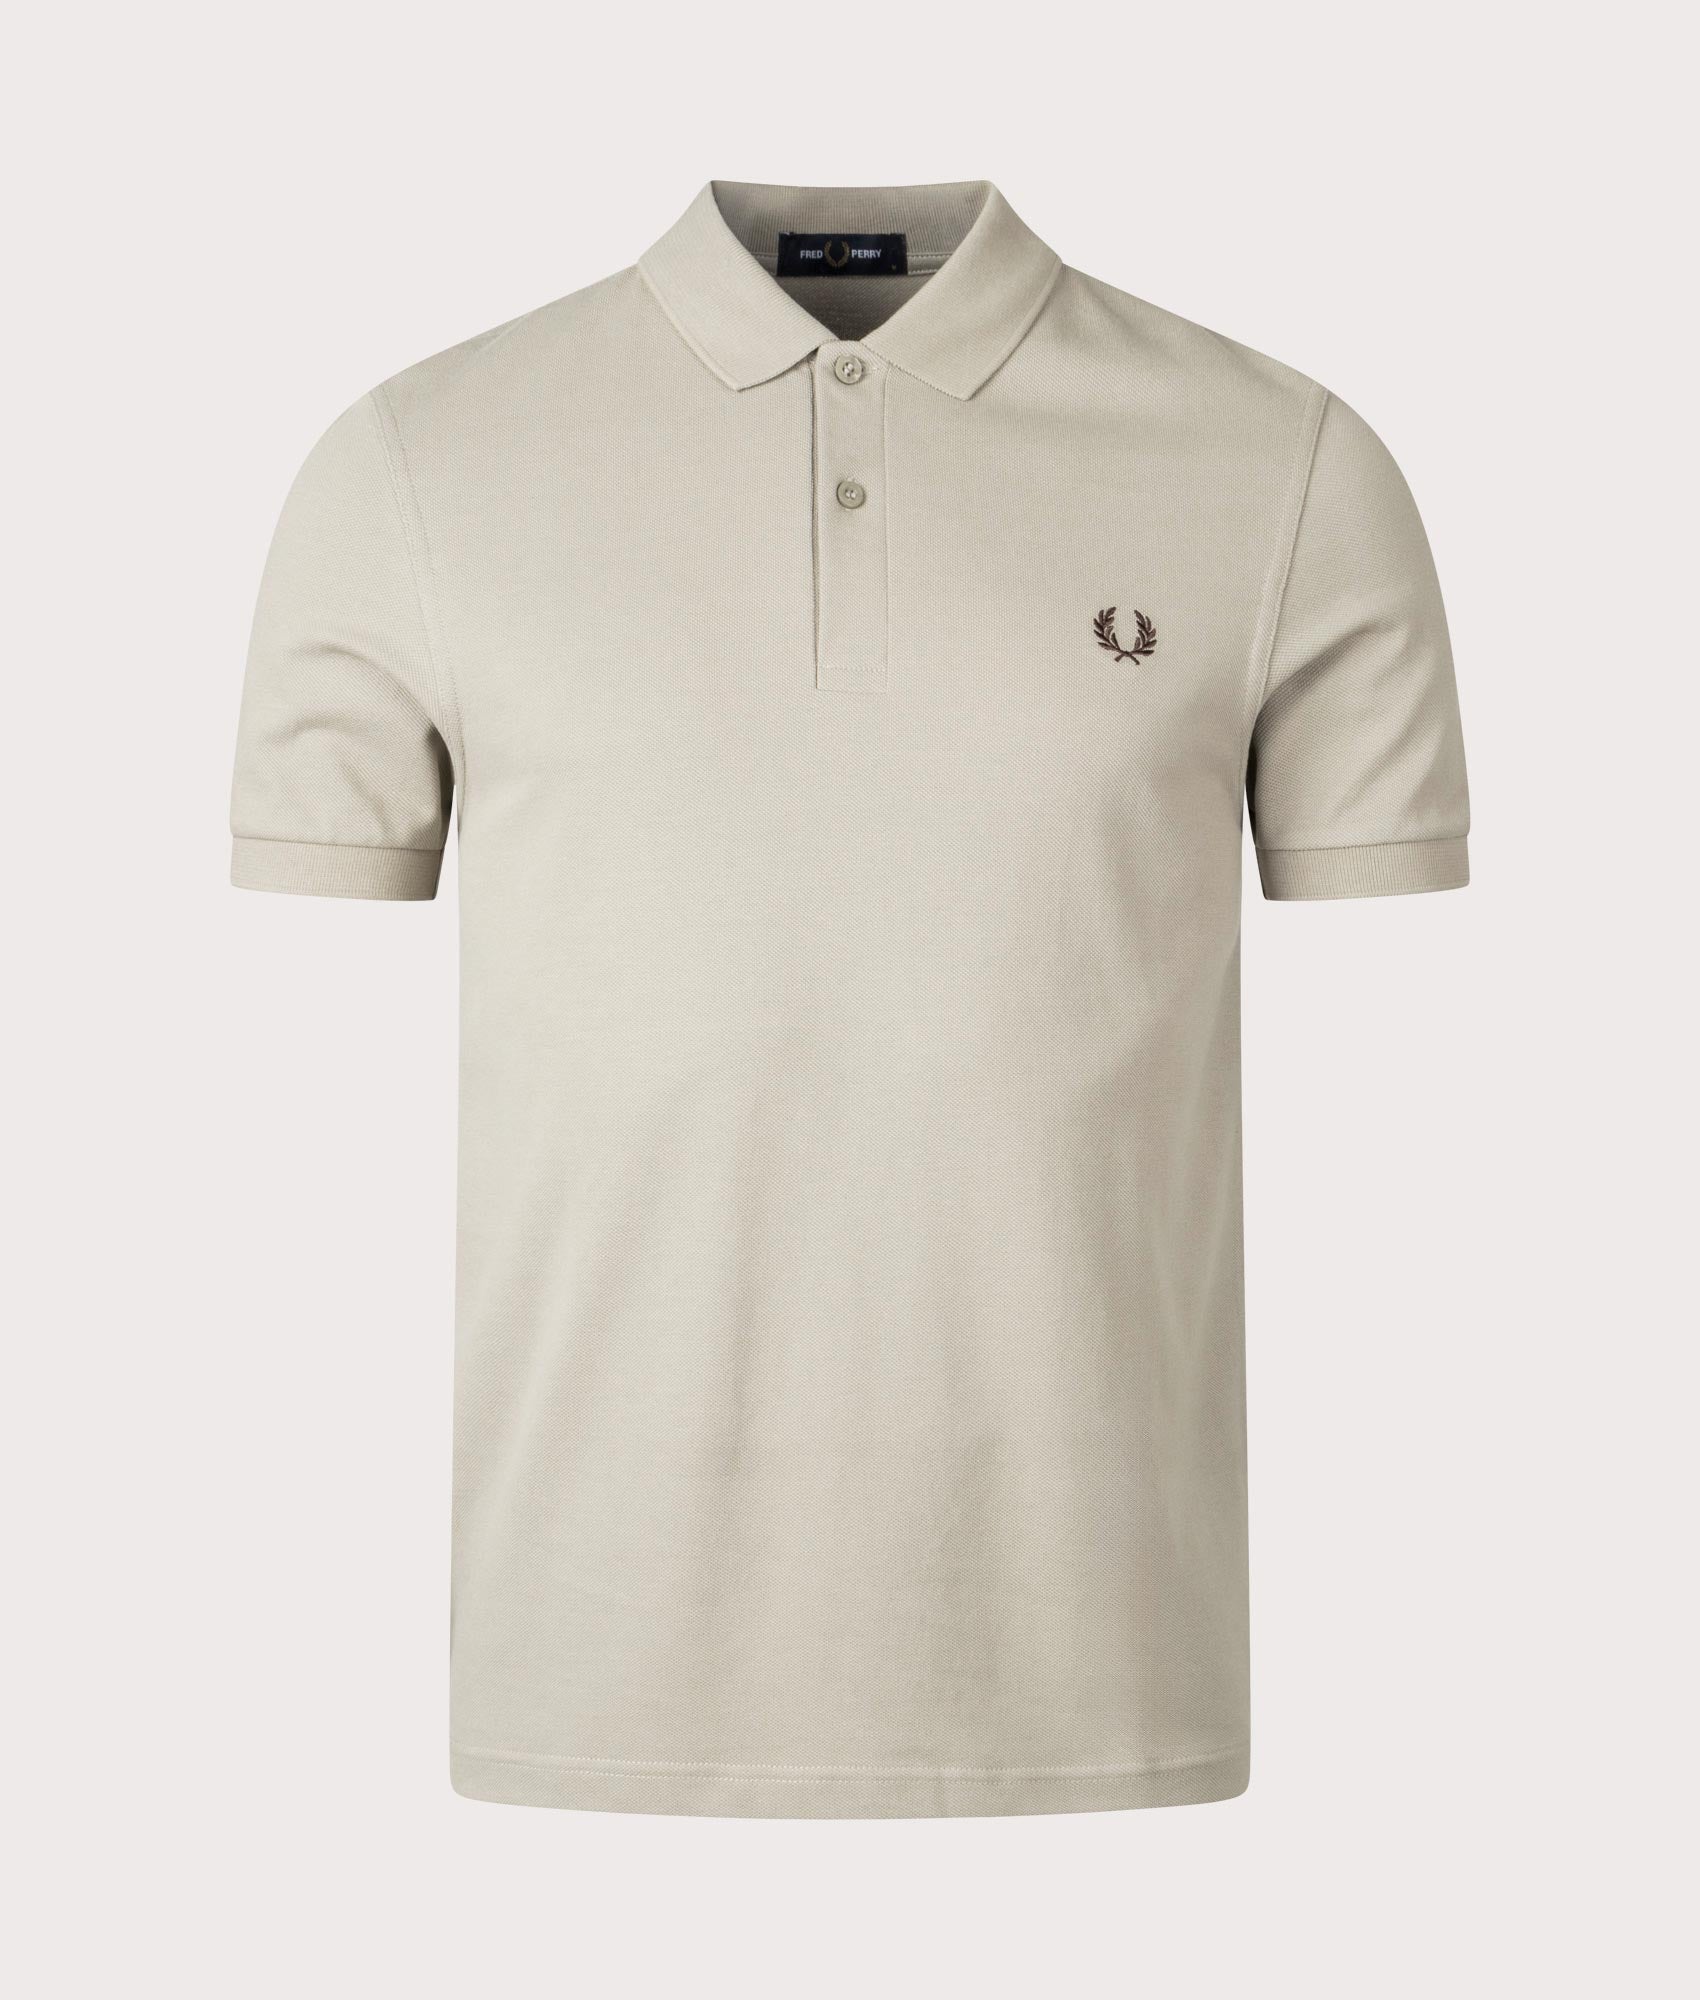 Fred Perry Mens Plain Fred Perry Shirt - Colour: U84 Warm Grey/Carrington Road Brick - Size: Large